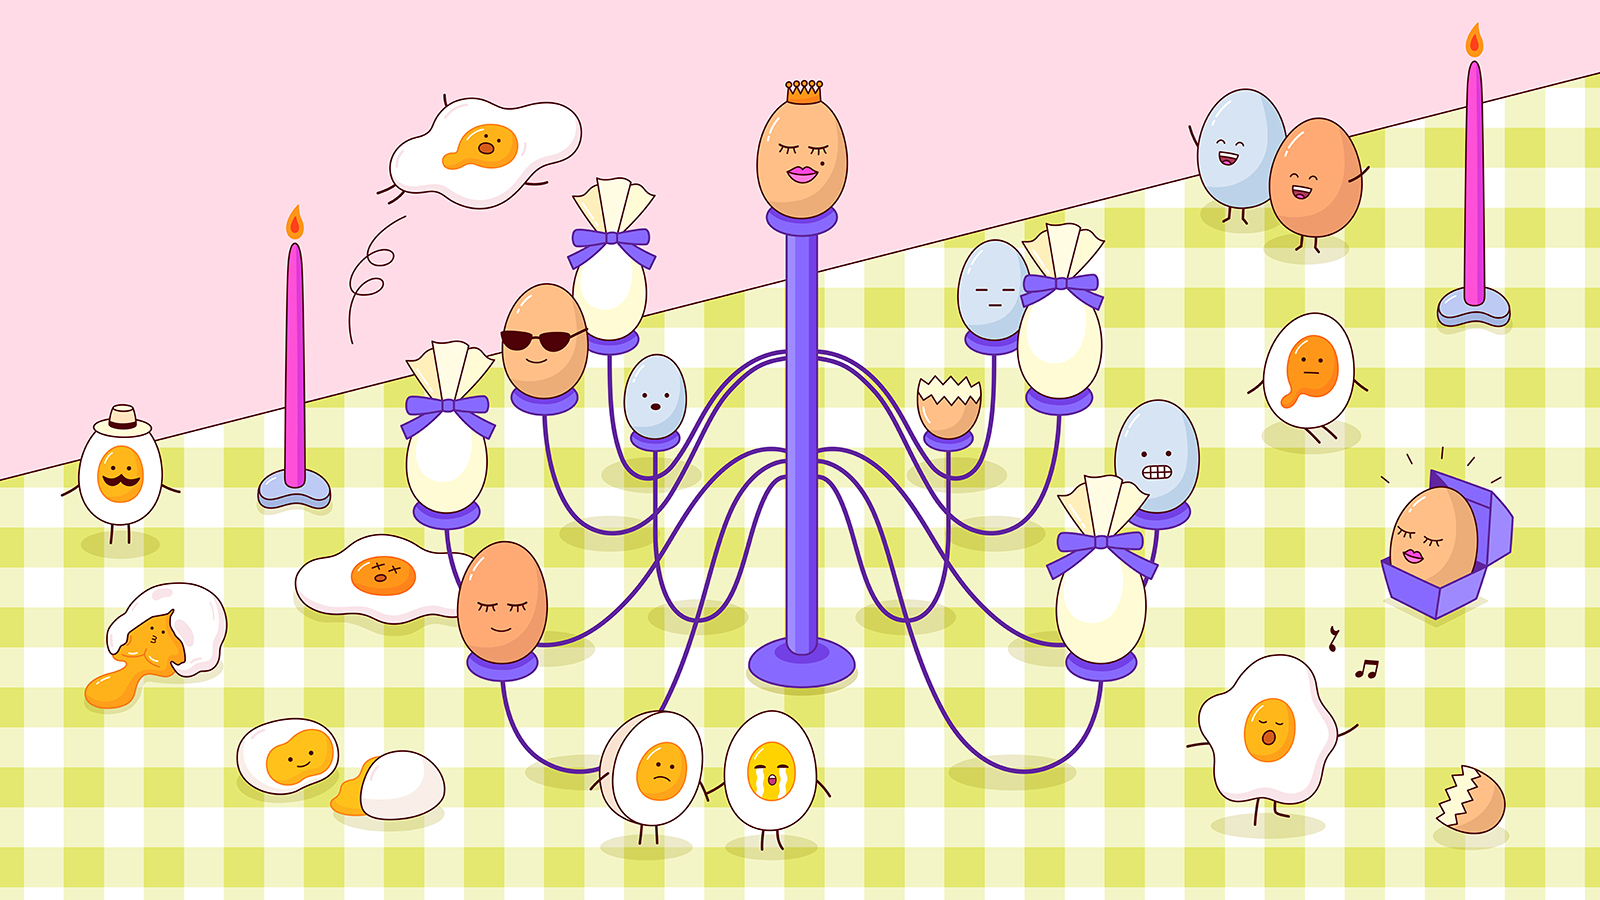 Anthropomorphized eggs sit in an egg chandelier on a table, surrounded by other anthropomorphized eggs. Illustration.